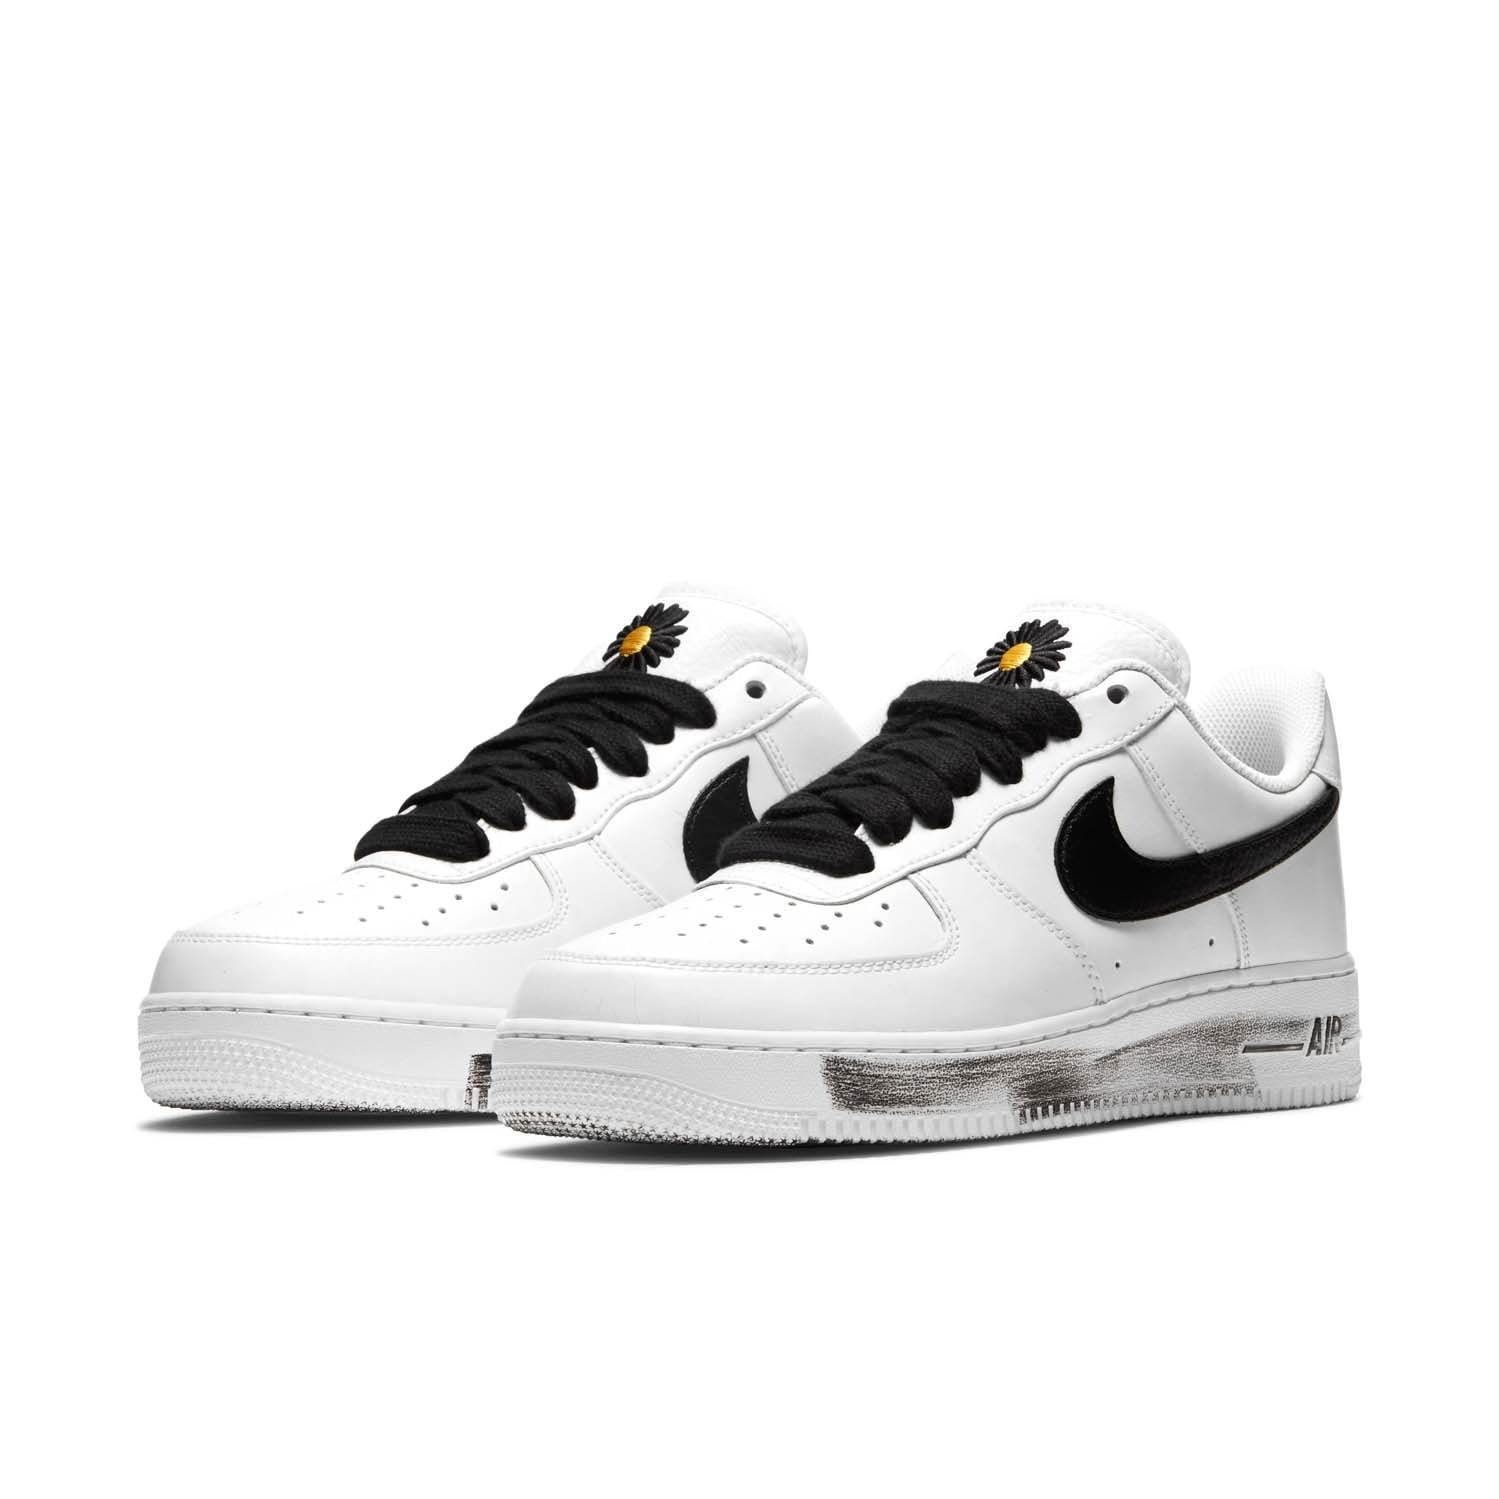 NIKE  G-DRAGON AIR FORCE  パラノイズ snkrs当選